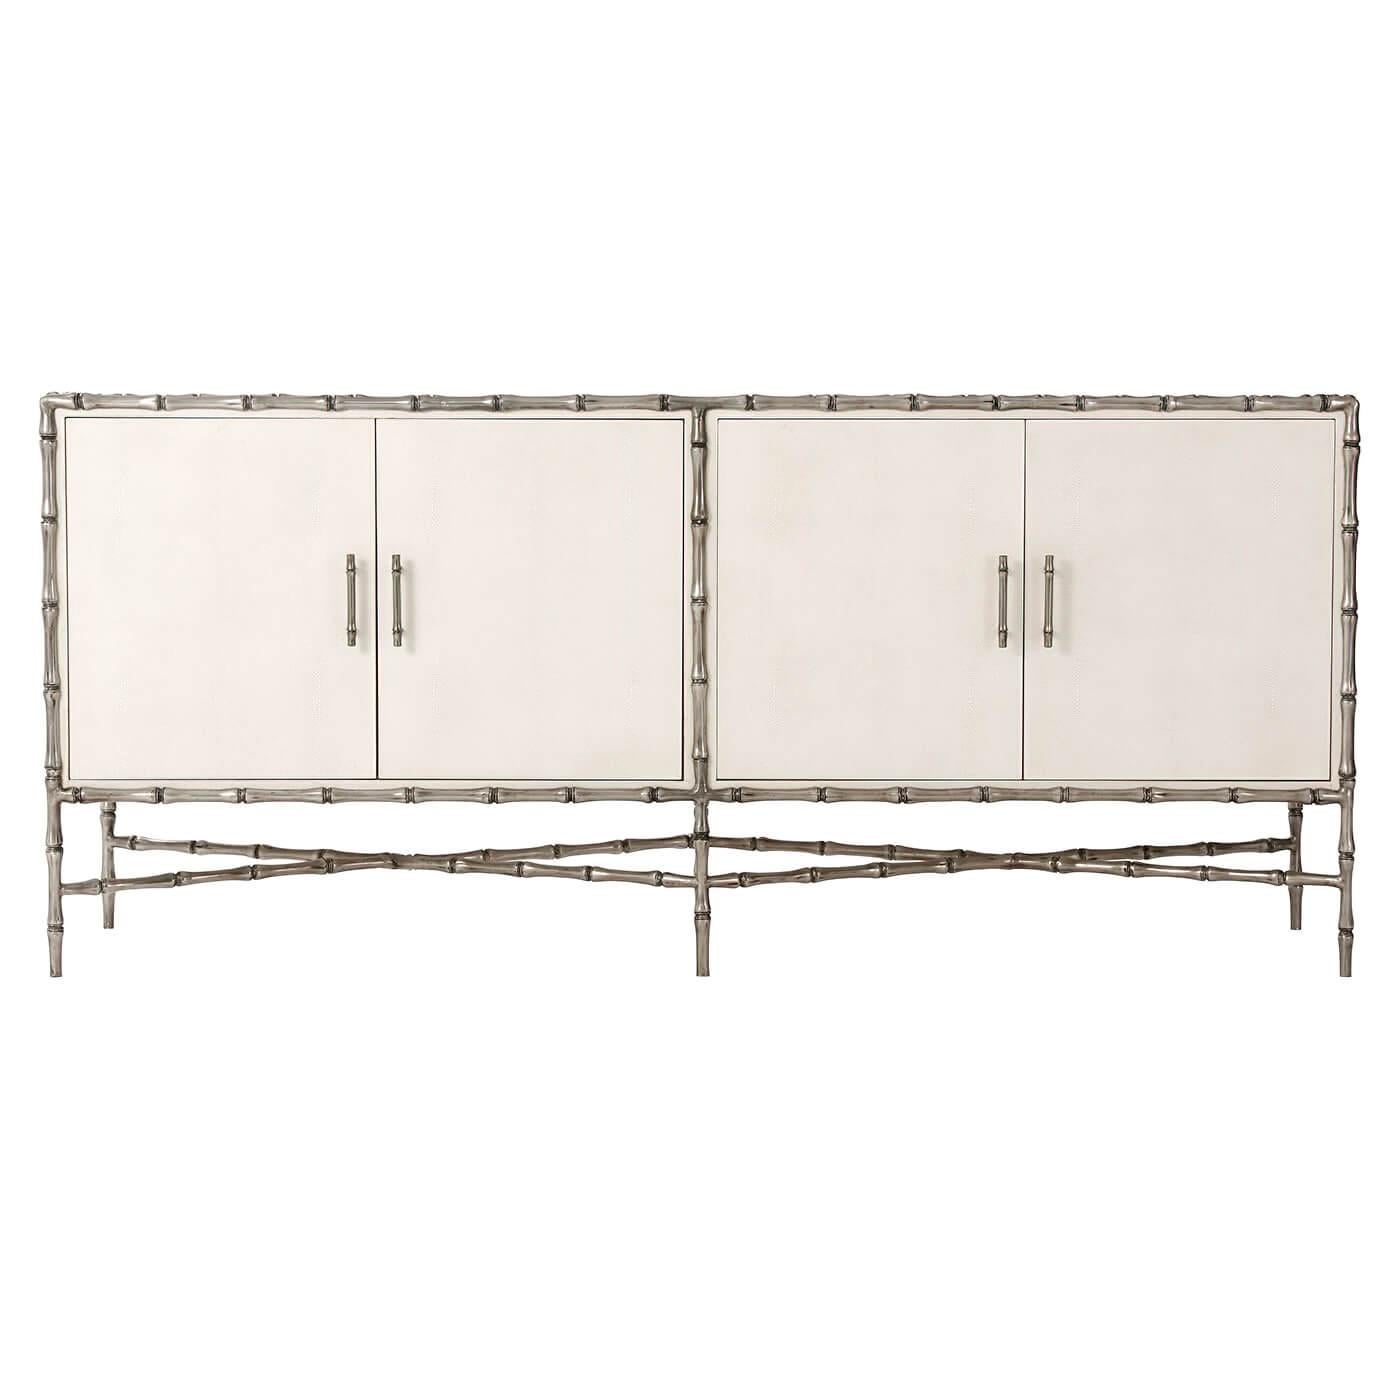 Mid-century sideboard with ivory shagreen embossed leather-wrapping and faux bamboo metal frame, legs, and X-form stretchers. 

Dimensions: 72